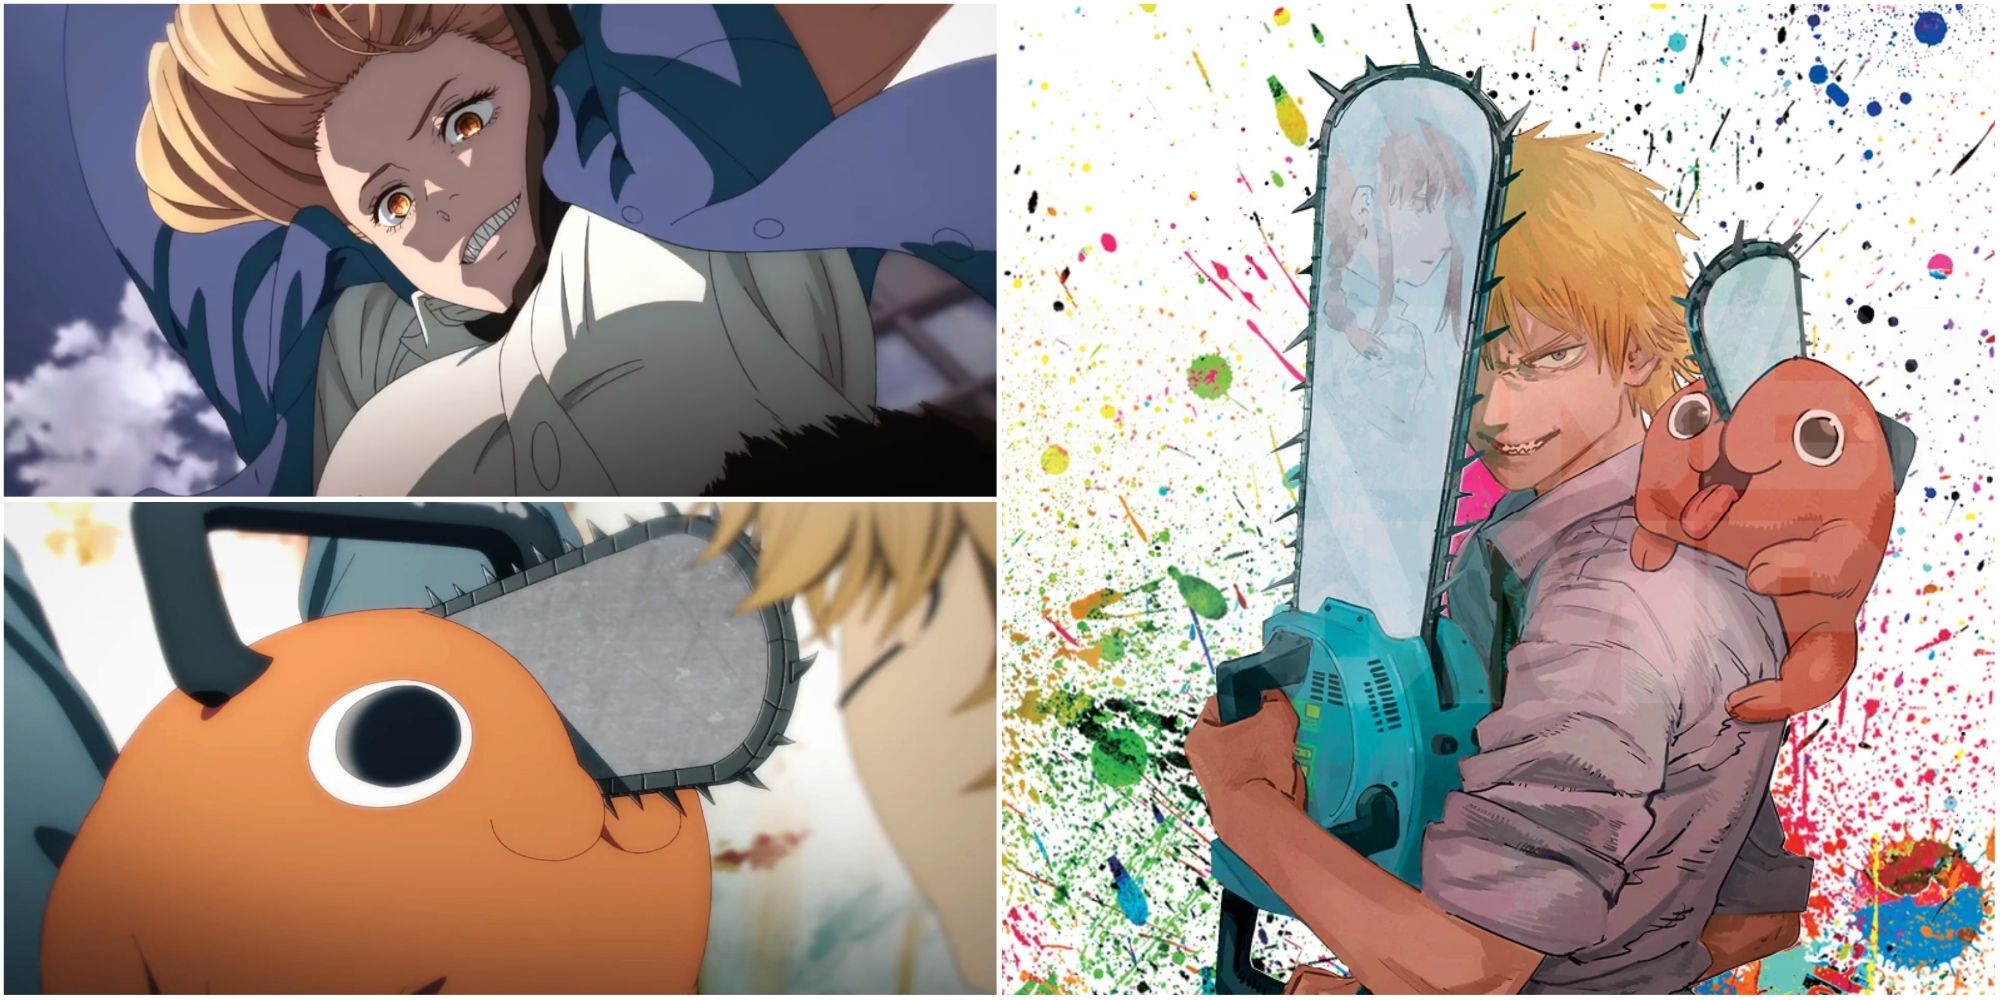 Three-way split image of Chainsaw Man characters